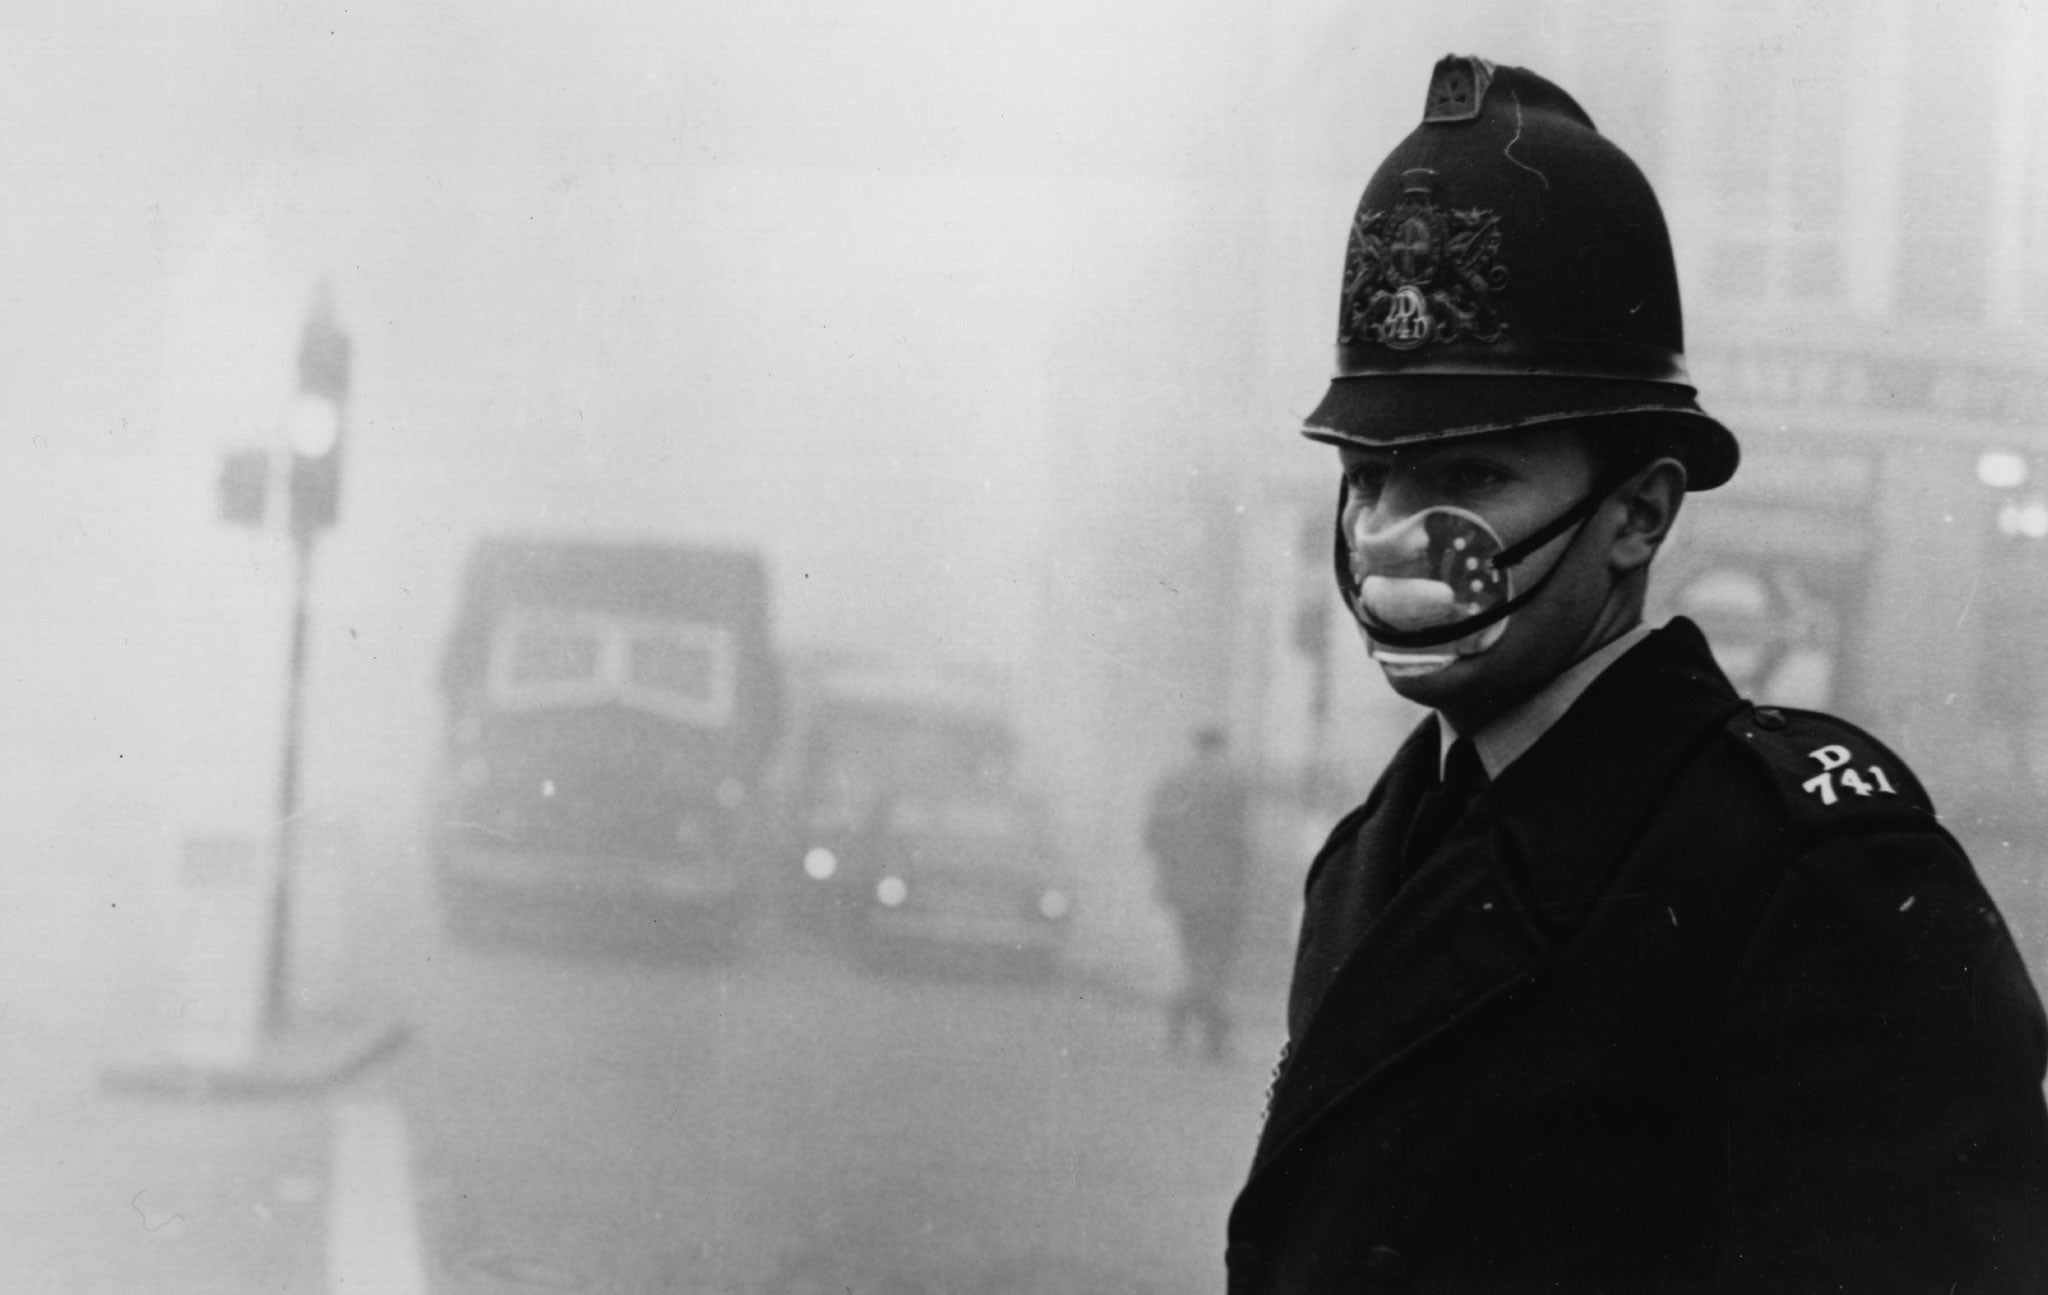 A London policeman wearing a mask for protection against the thick fog which hit most of the country and turned to smog in the city